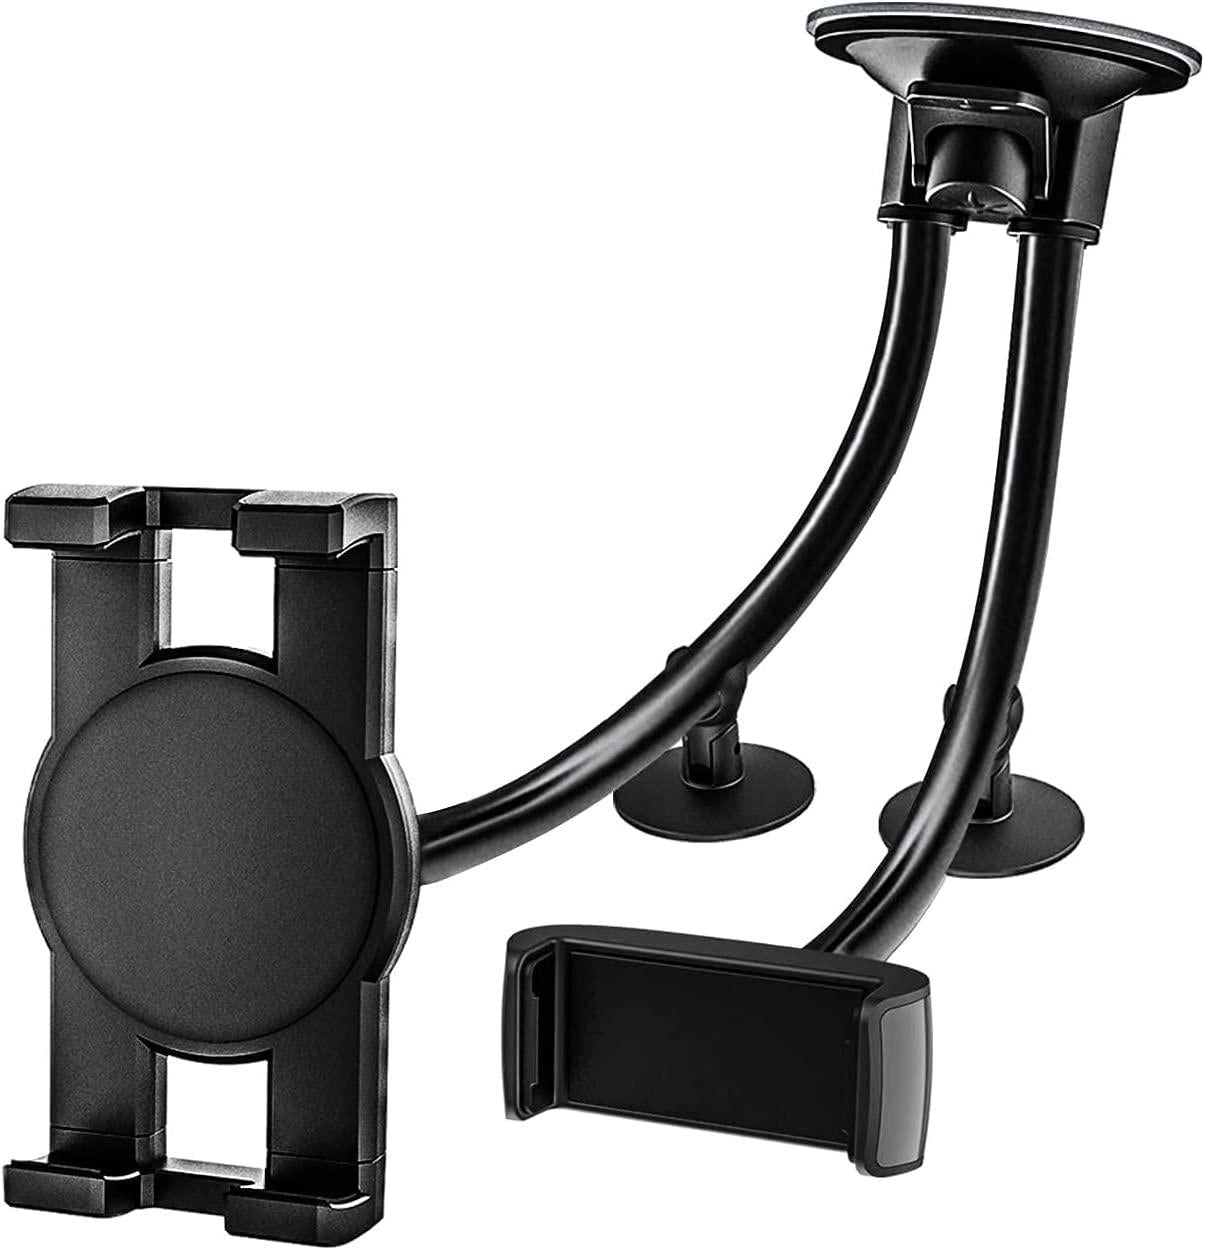 EXSHOW, Dual Car Tablet Mount, EXSHOW Windshield Car Window Phone and Tablet Holder with Double Long Arm Suction Cup for iPad Pro 9.7, 11, 12.9 Air Mini 5 4 3 2, Tabs, iPhone, More 4-13 Cell Phones and Tablets